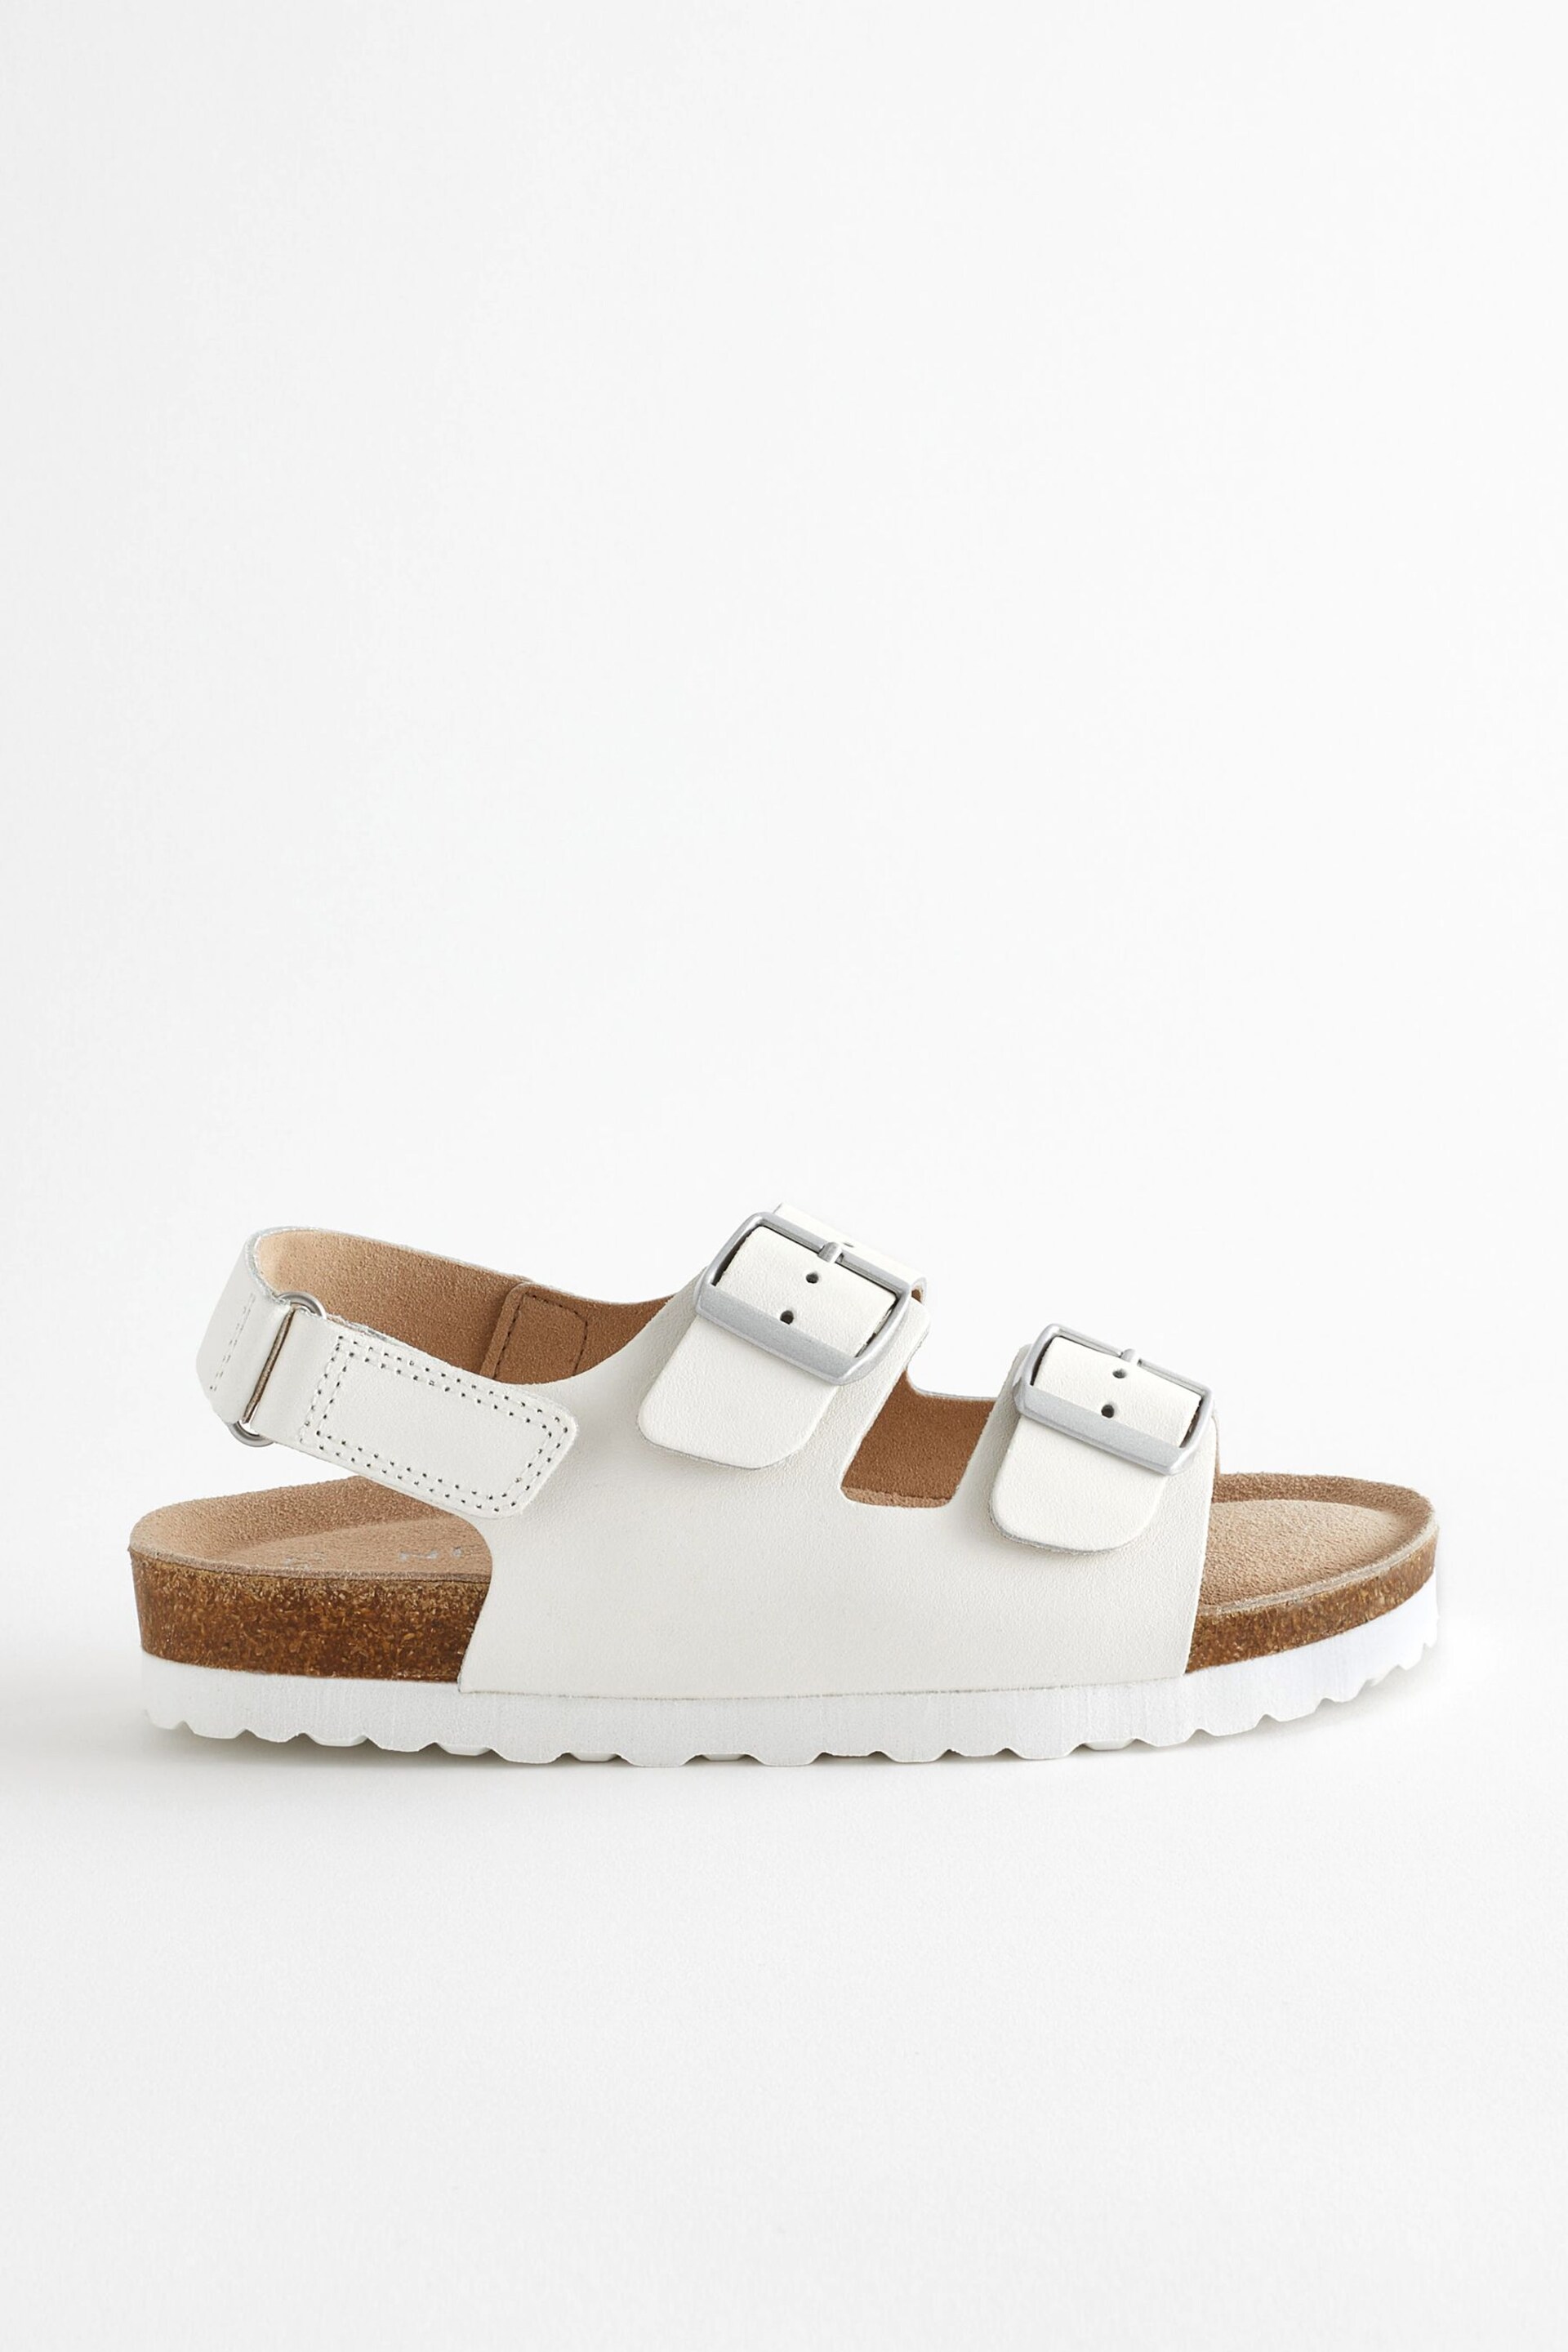 White Leather Wide Fit (G) Two Strap Corkbed Sandals - Image 2 of 7